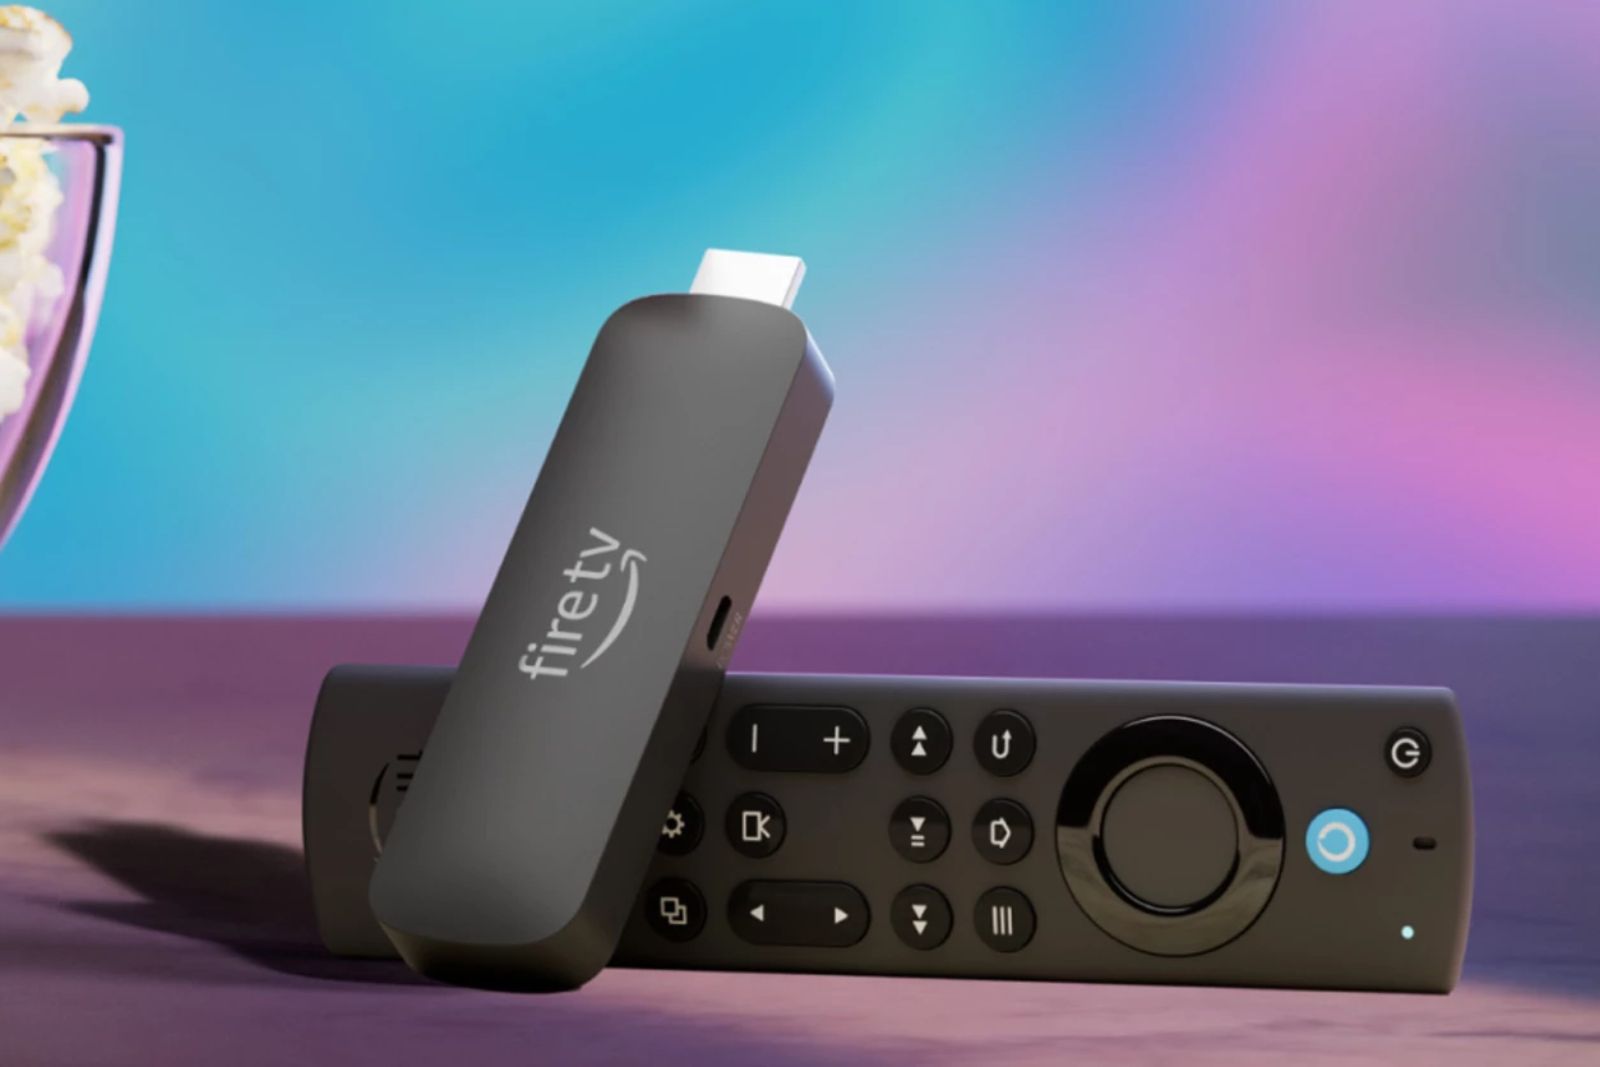 New Amazon Fire TV Stick 4K dongles get Wi-Fi 6/6E, faster processing and an ambient mode